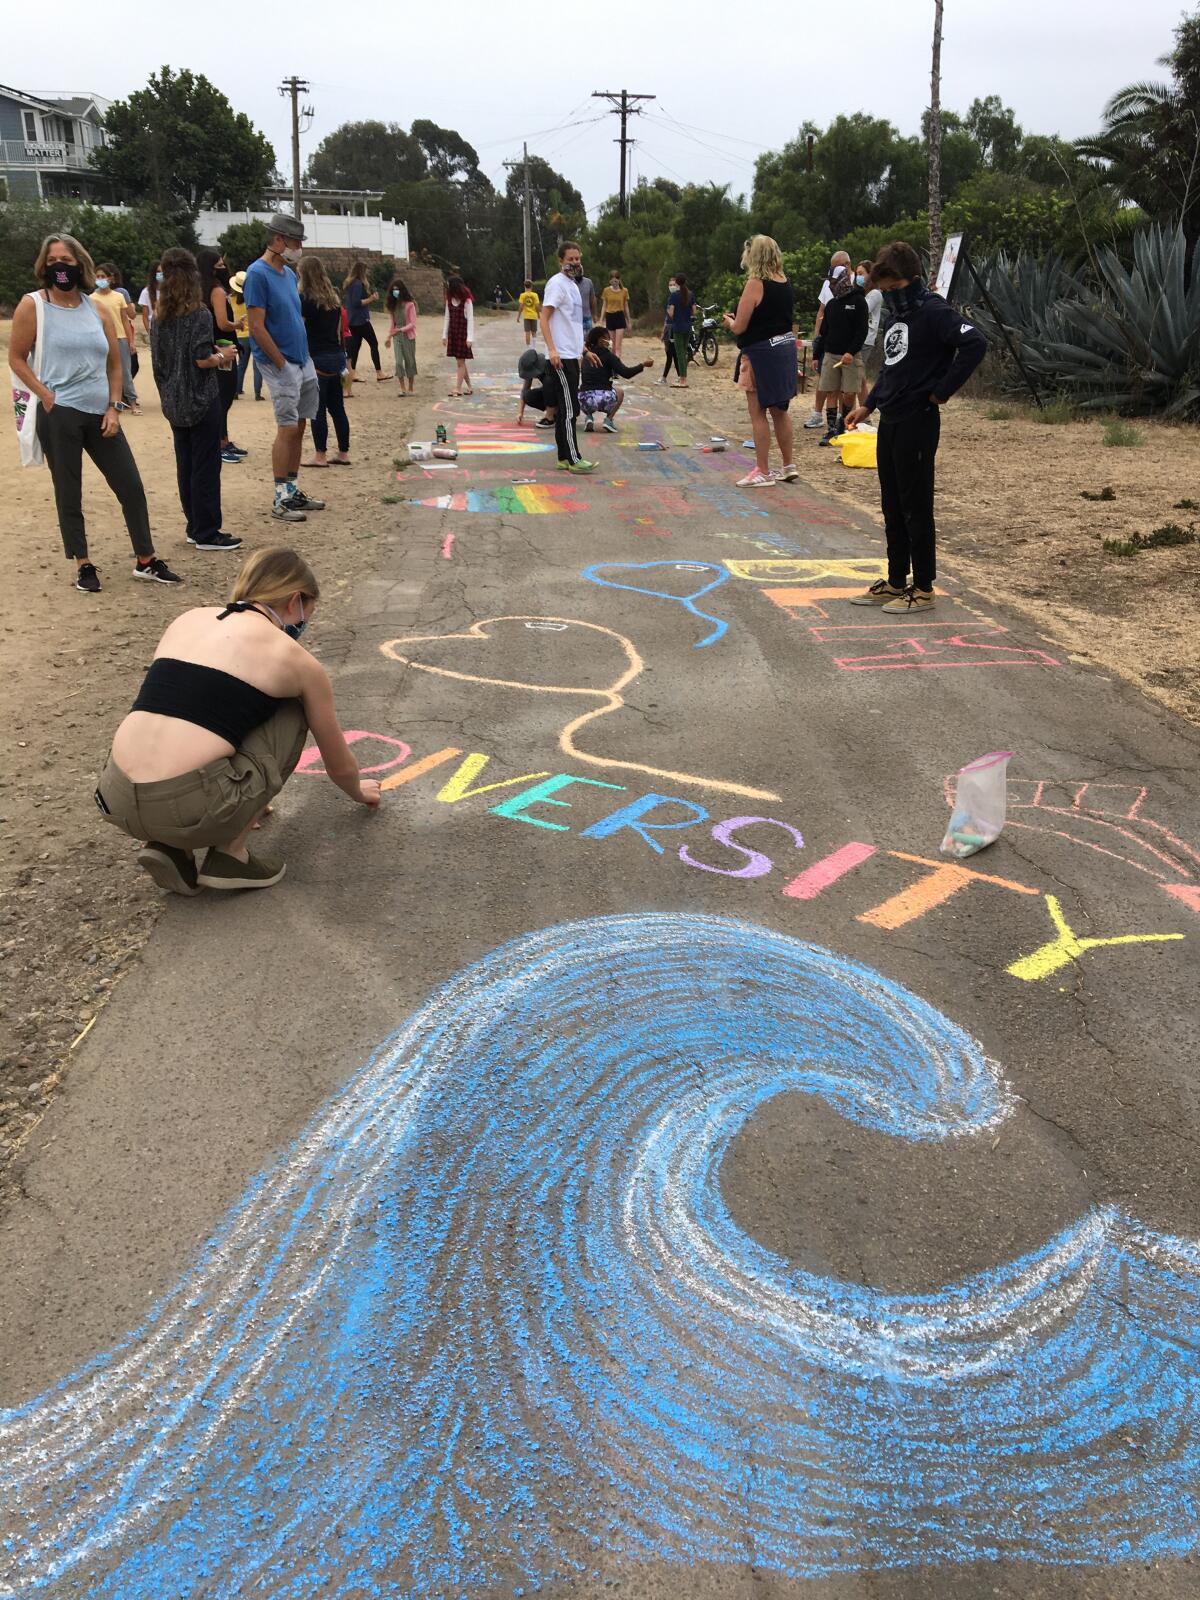 Area residents add chalk drawings to the La Jolla Bike Path in support of the Black Lives Matter movement Sept. 27.